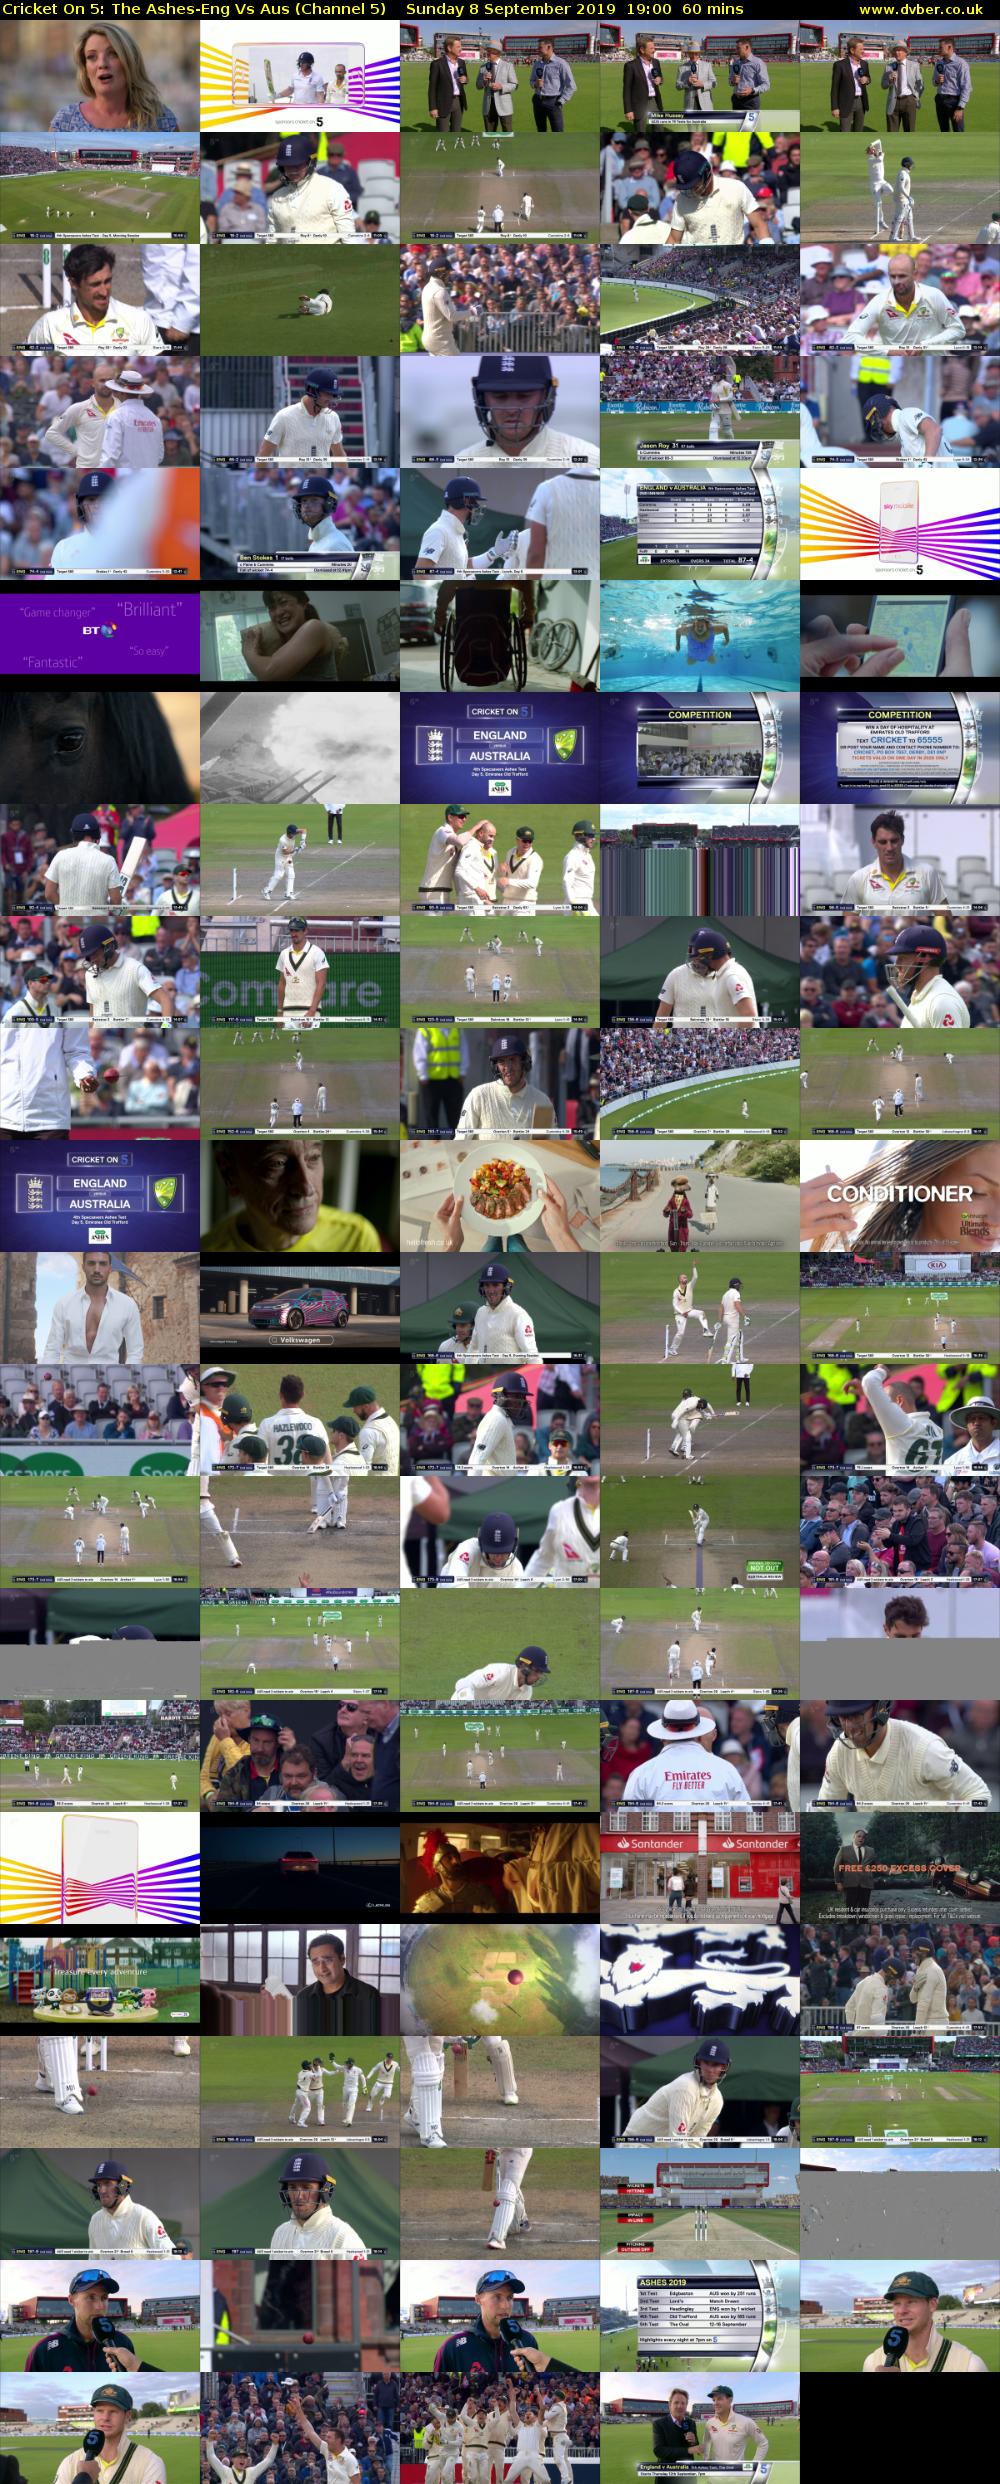 Cricket On 5: The Ashes-Eng Vs Aus (Channel 5) Sunday 8 September 2019 19:00 - 20:00